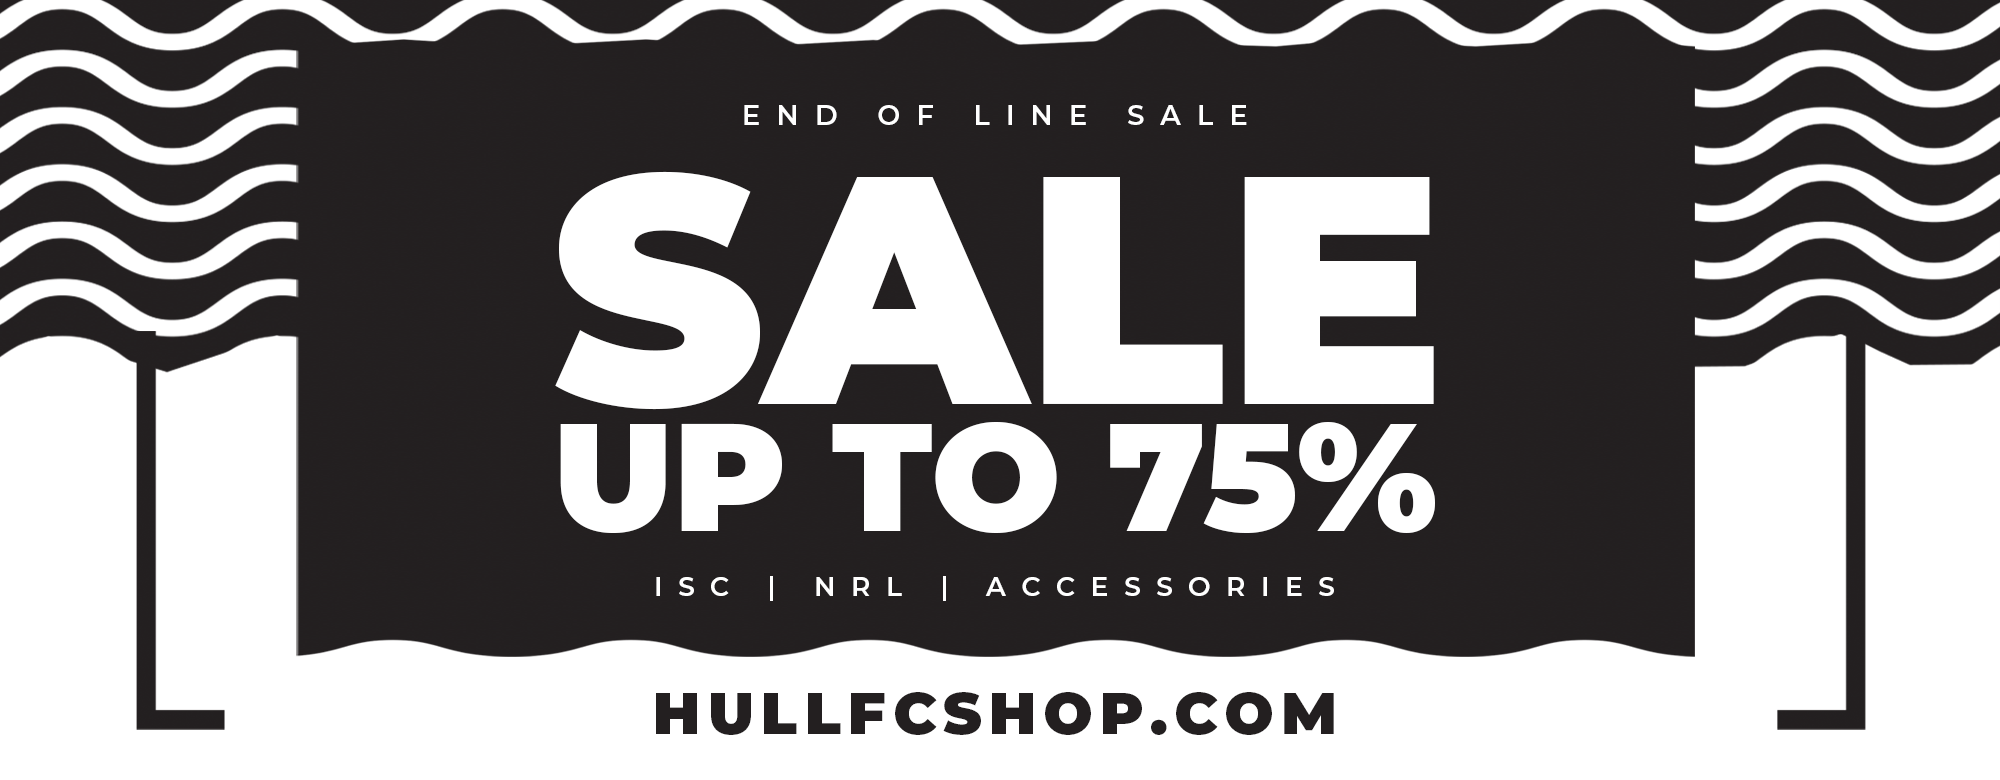 Up To 75% Off In End Of Line Sale!